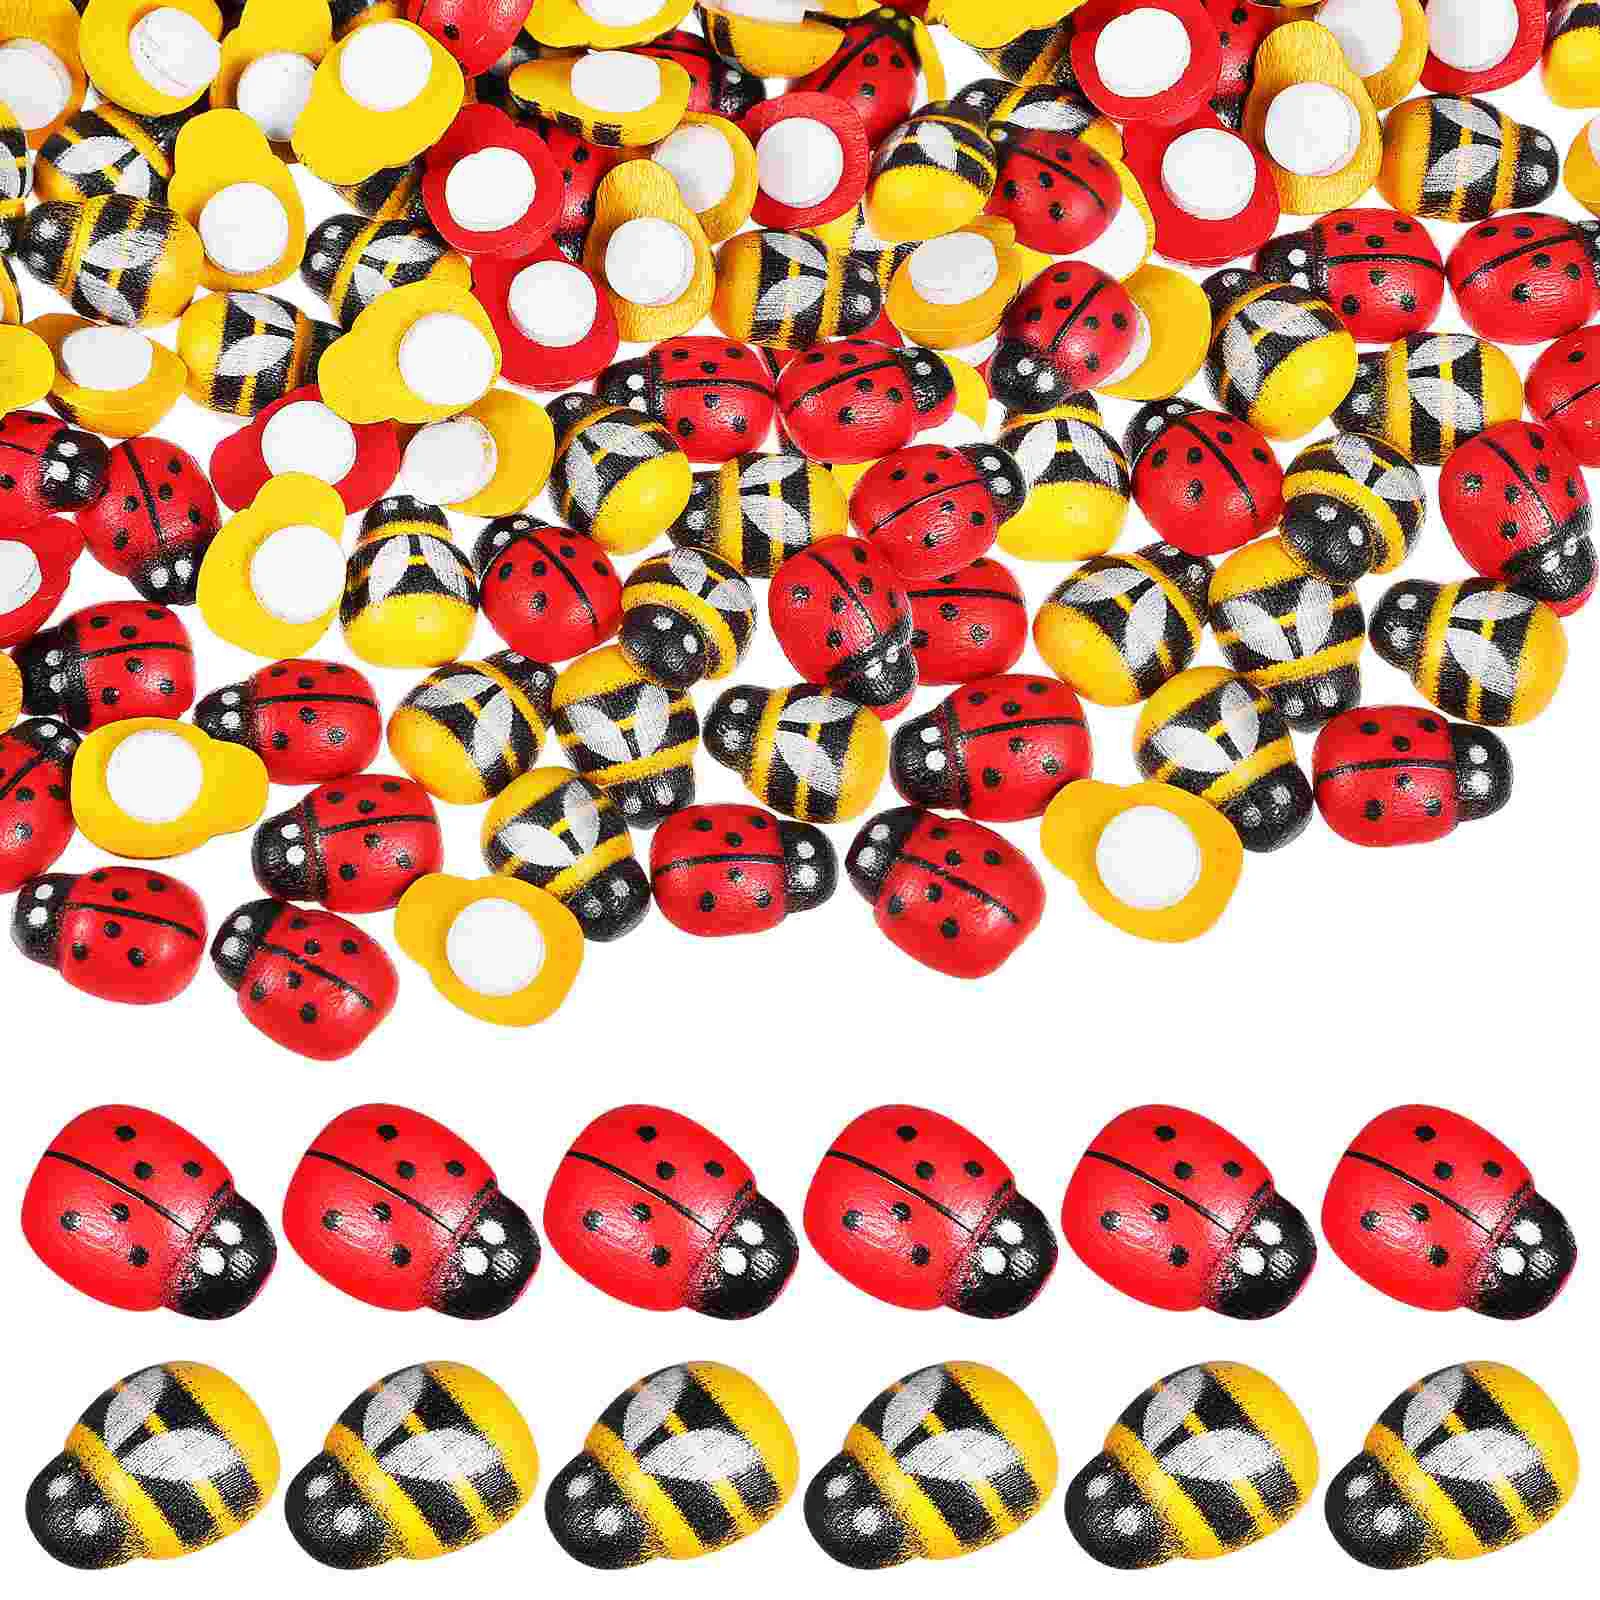 

400 Pcs Wooden Decoration Ladybirds Gifts Ladybug Embellishments Bee Stickers Crafts Mini Scrapbook Wall Baby Woodsy